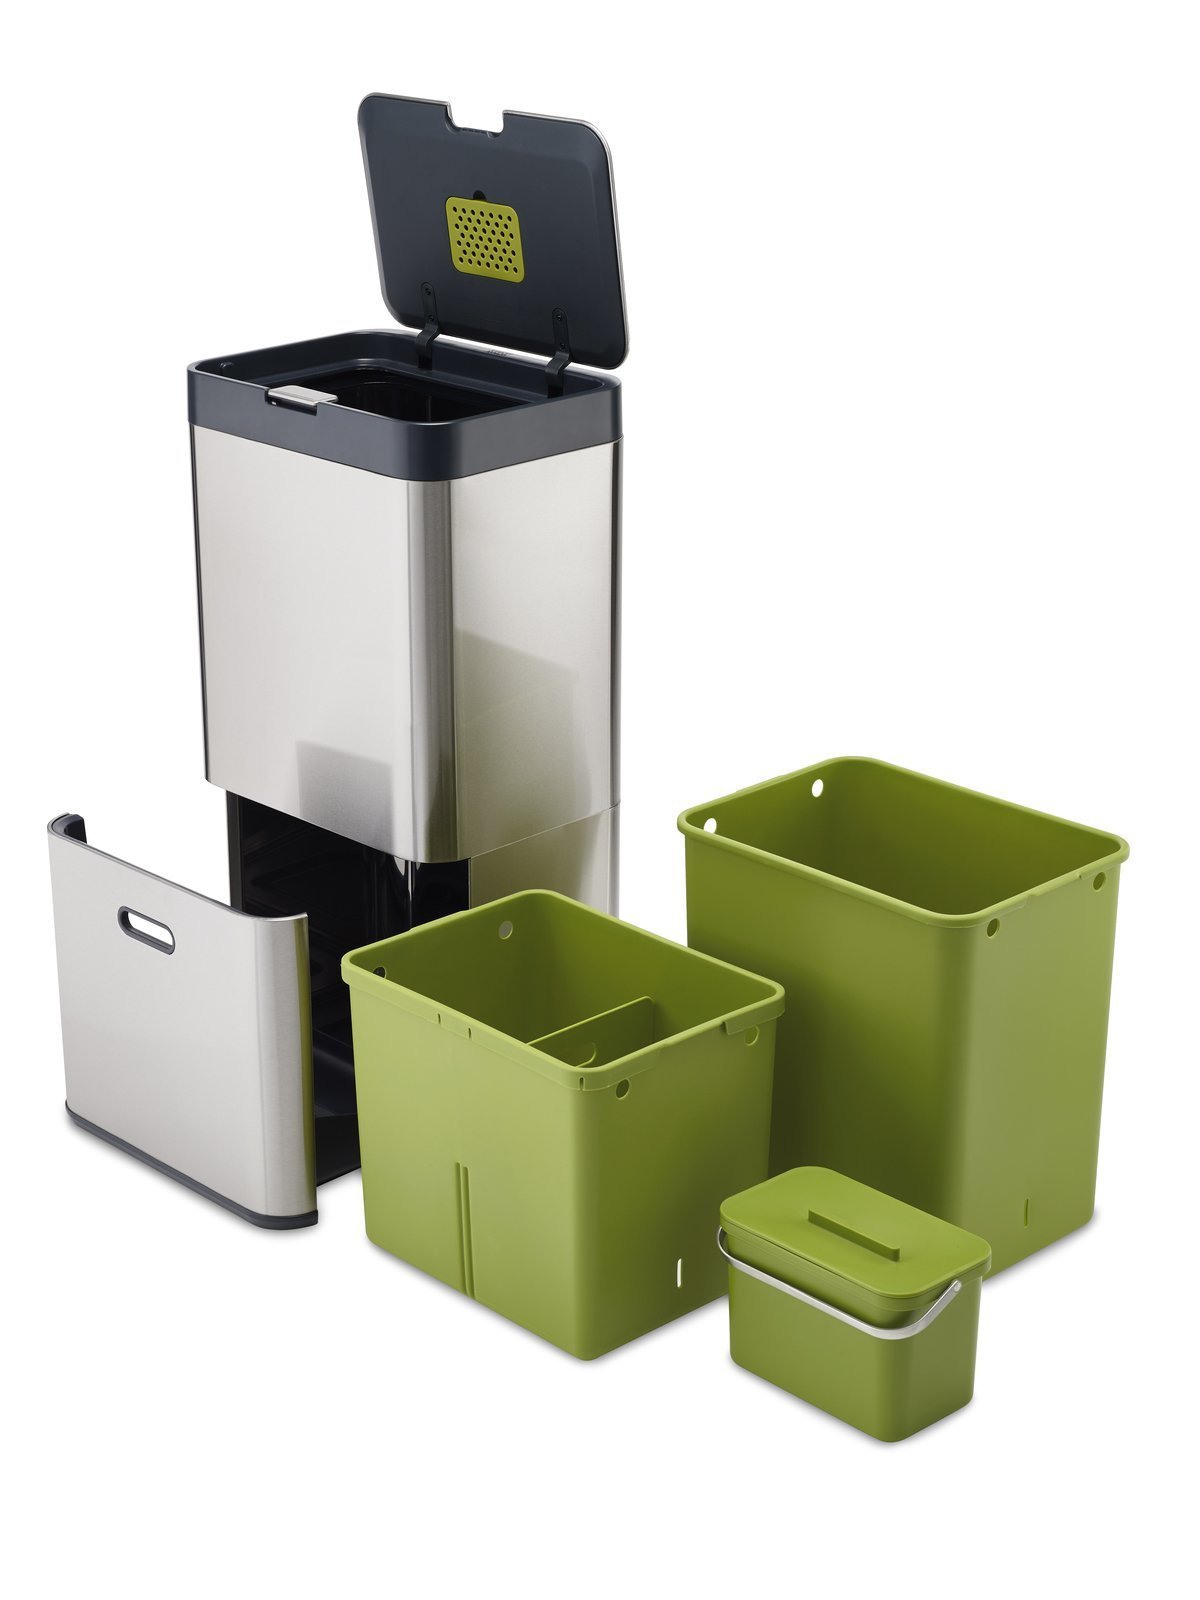 Products joseph joseph 30022 intelligent waste totem kitchen trash can and recycle bin unit with compost bin 16 gallon 60 liter stainless steel